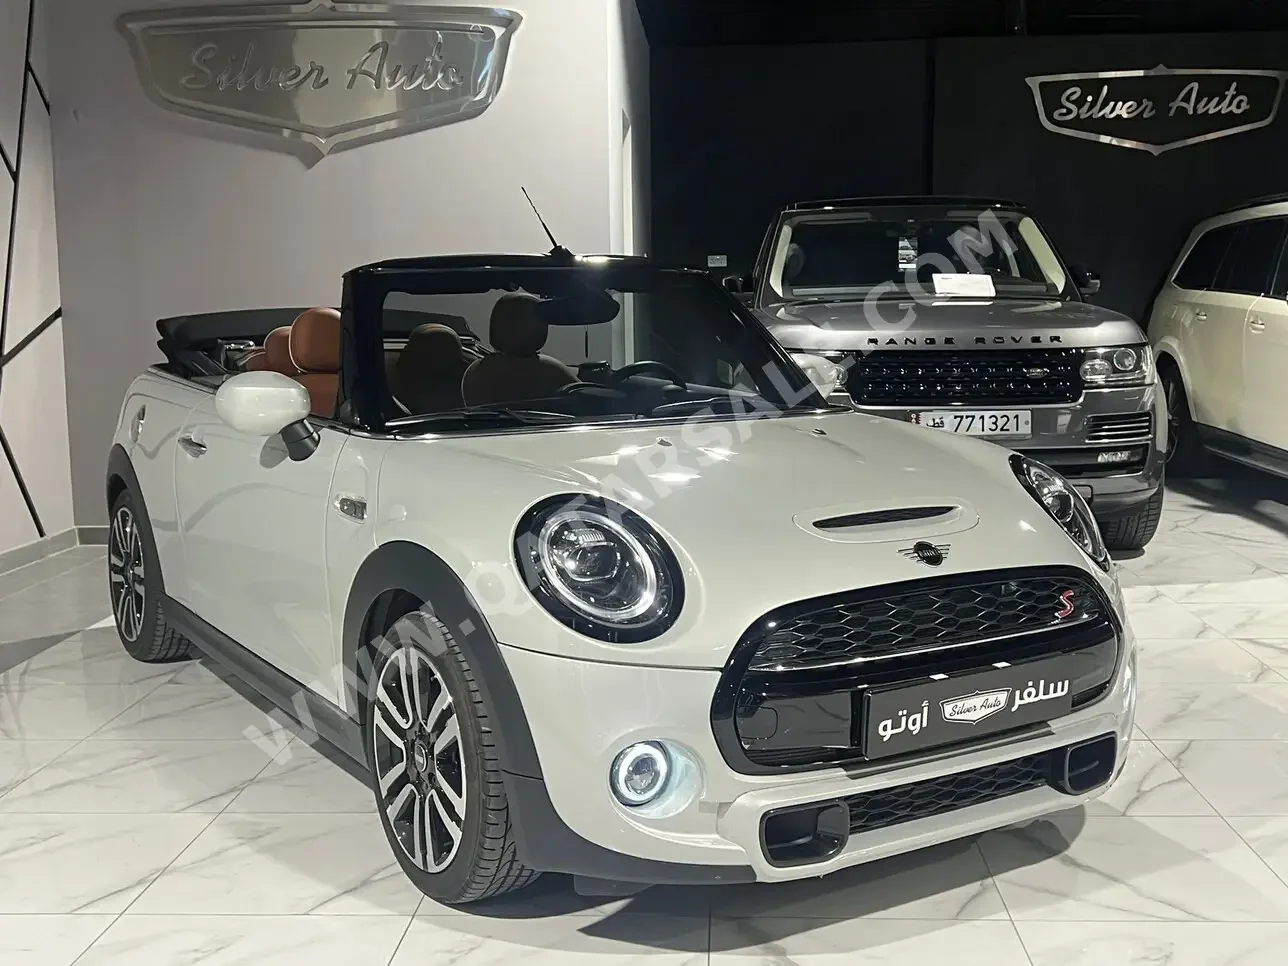 Mini  Cooper  S  2020  Automatic  17,000 Km  4 Cylinder  Front Wheel Drive (FWD)  Convertible  White  With Warranty